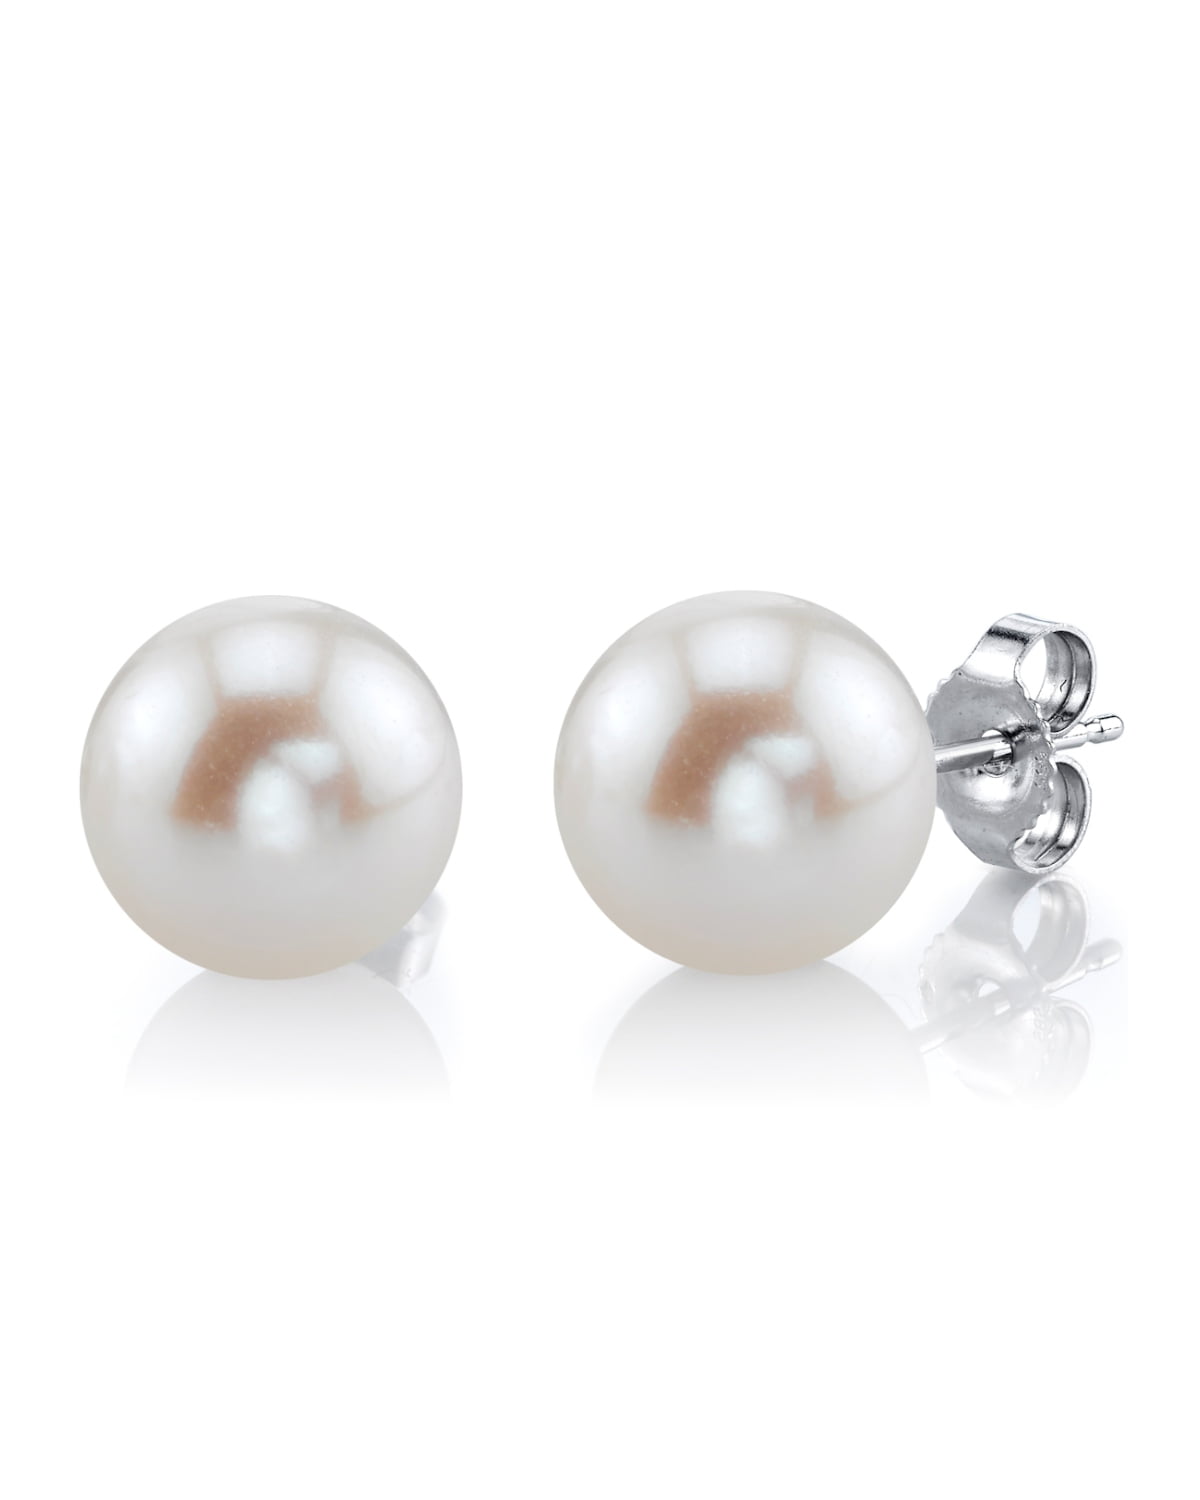 10MM AAA GENUINE WHITE PEARL STUD EARRINGS SOLID 14K YELLOW GOLD 